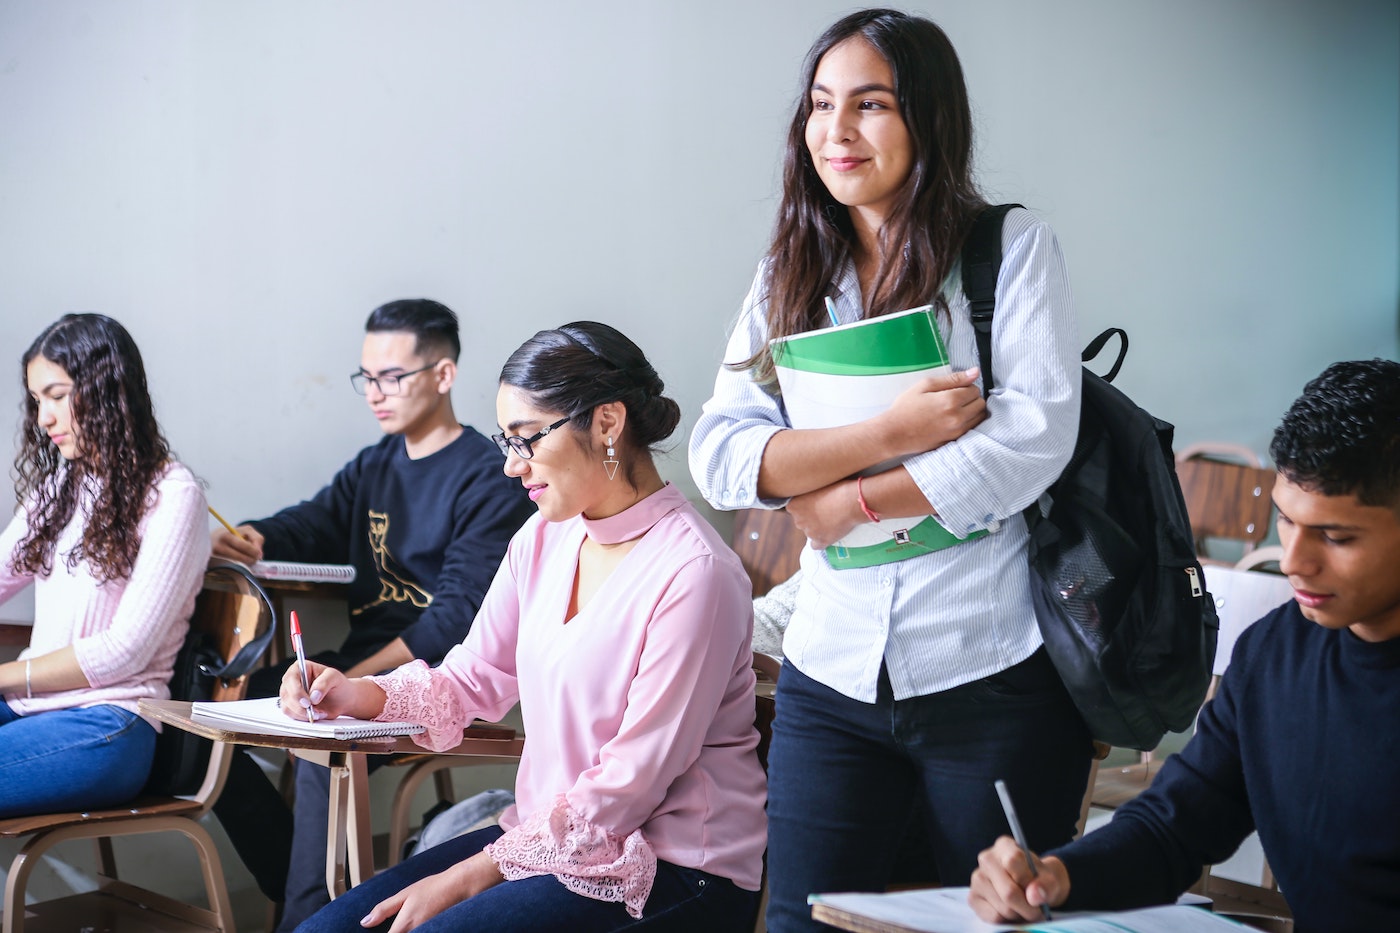 Five diverse students are in a classroom setting. Four of the students are happily sitting at their desks, writing in notebooks. One student, a young female with long dark hair and olive skin tone is holding her notebook in her arms and smiling the direction of the front of the classroom.